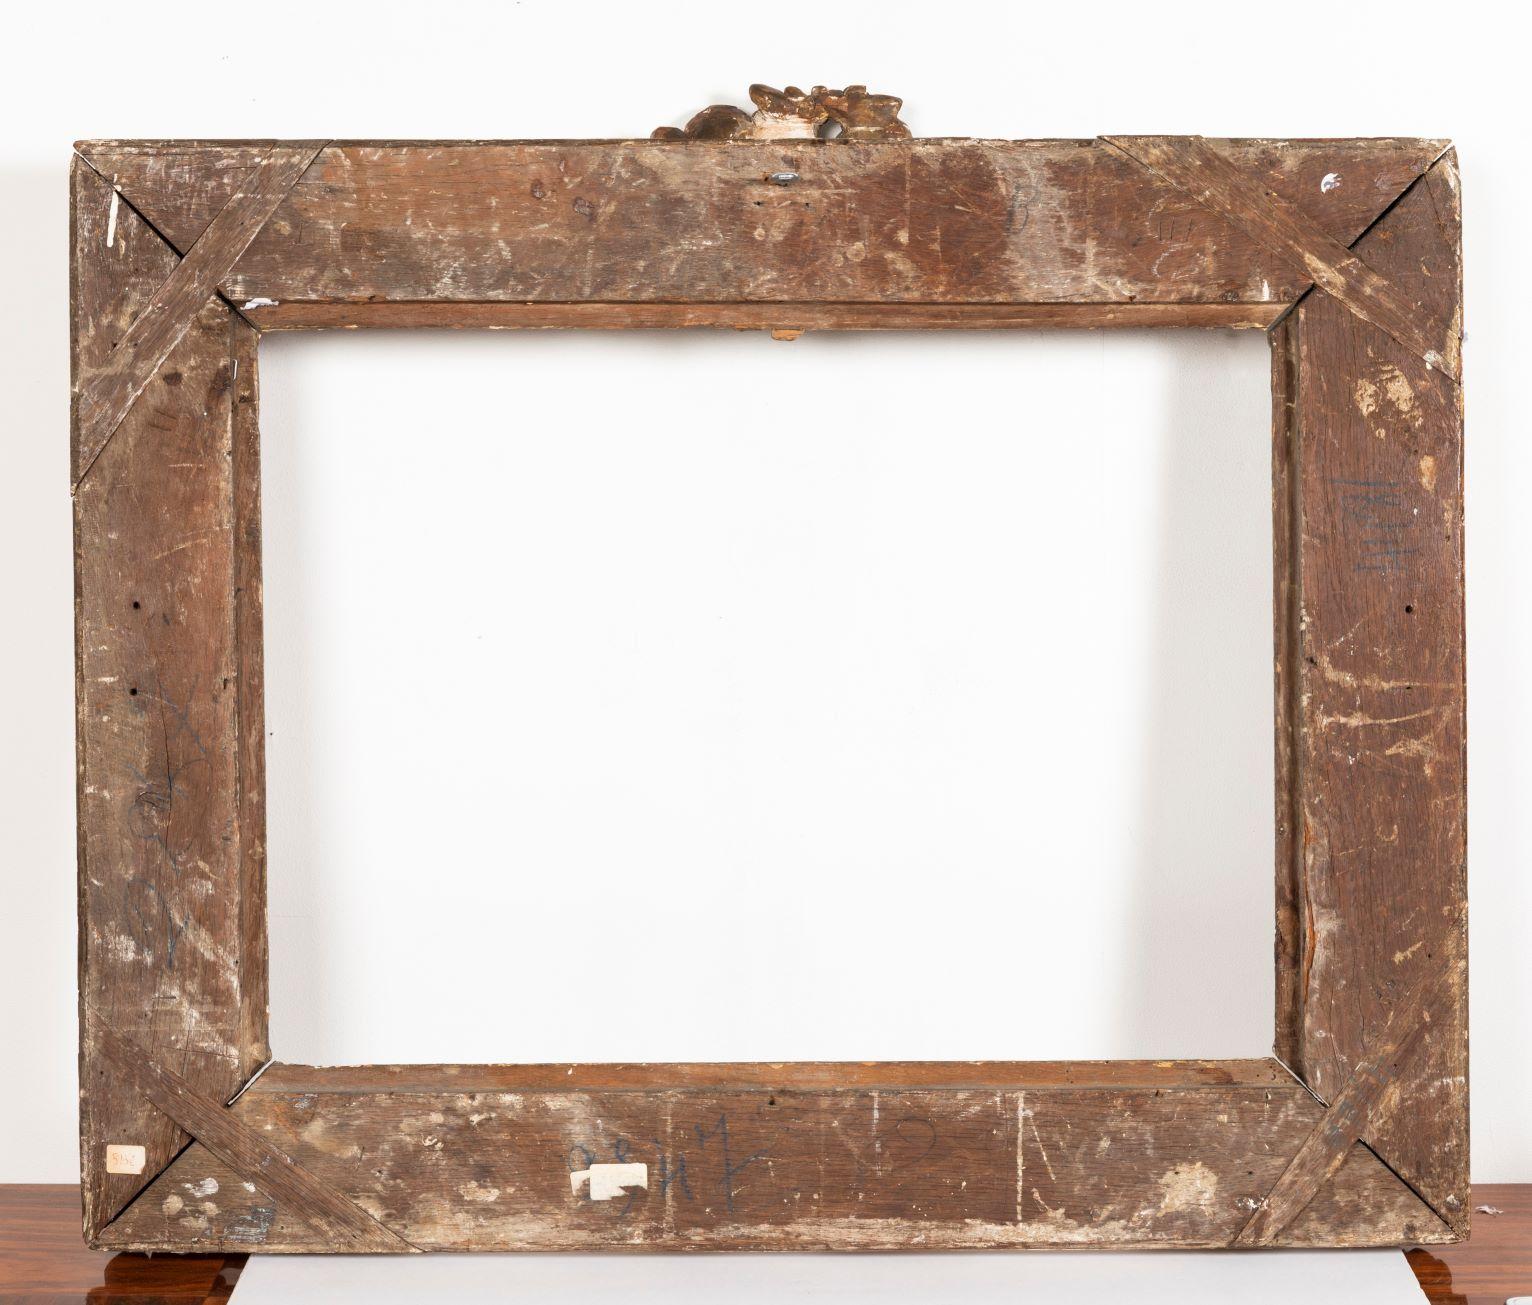 Superb Louis XV Period, Carved Giltwood Frame or Mirror France, Mid-18th Century For Sale 3